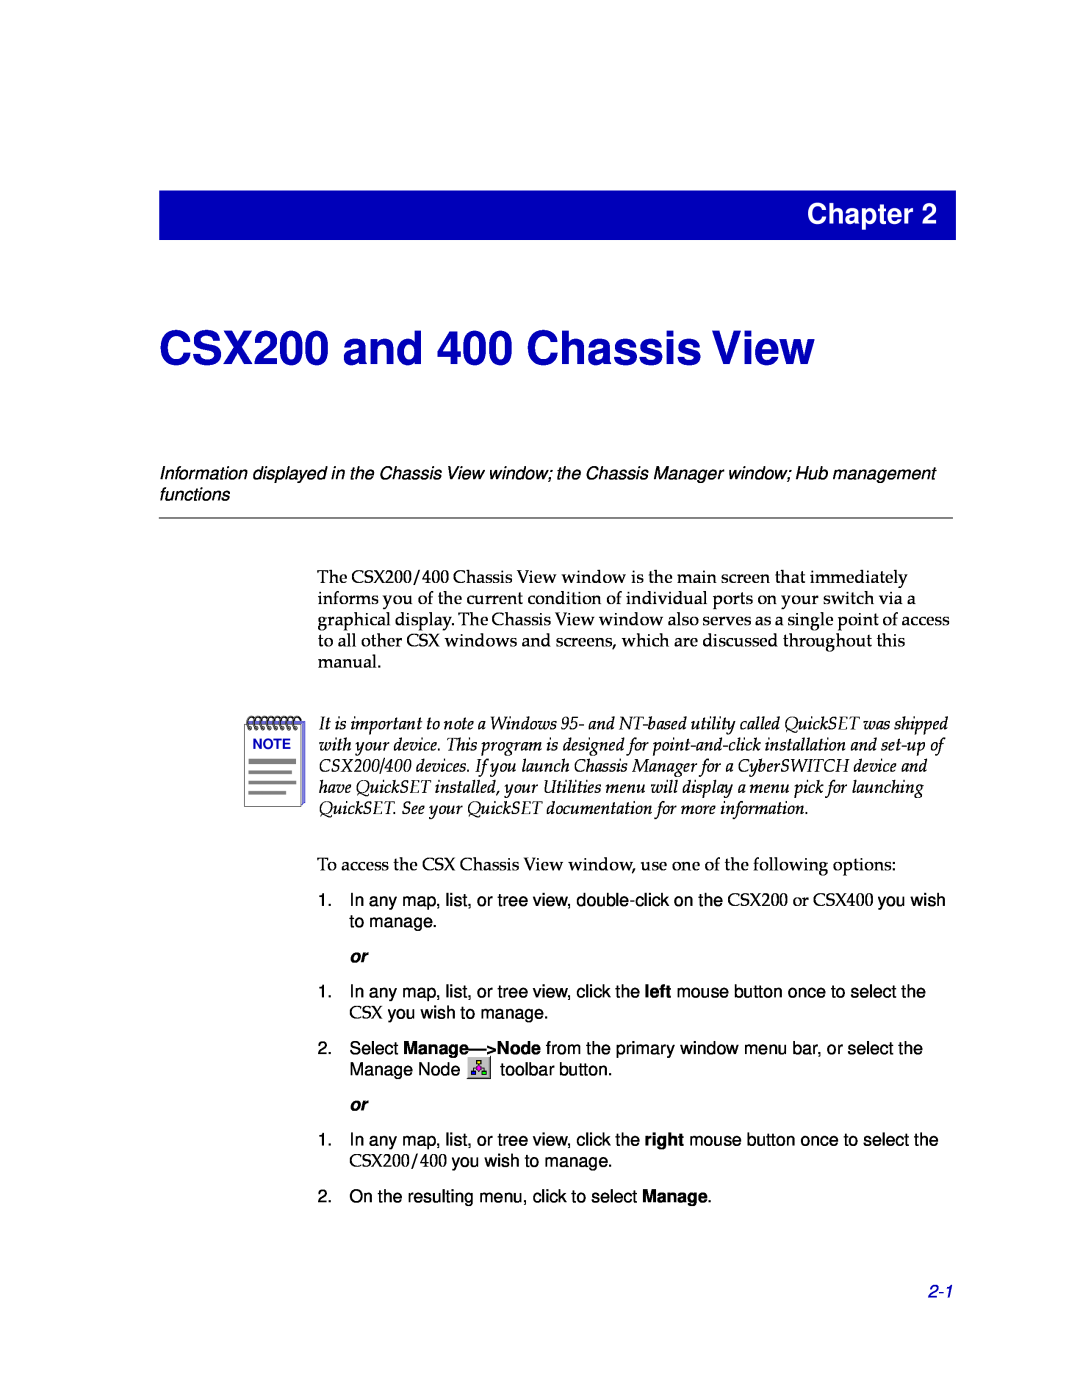 Cabletron Systems CSX400 manual CSX200 and 400 Chassis View, Chapter 